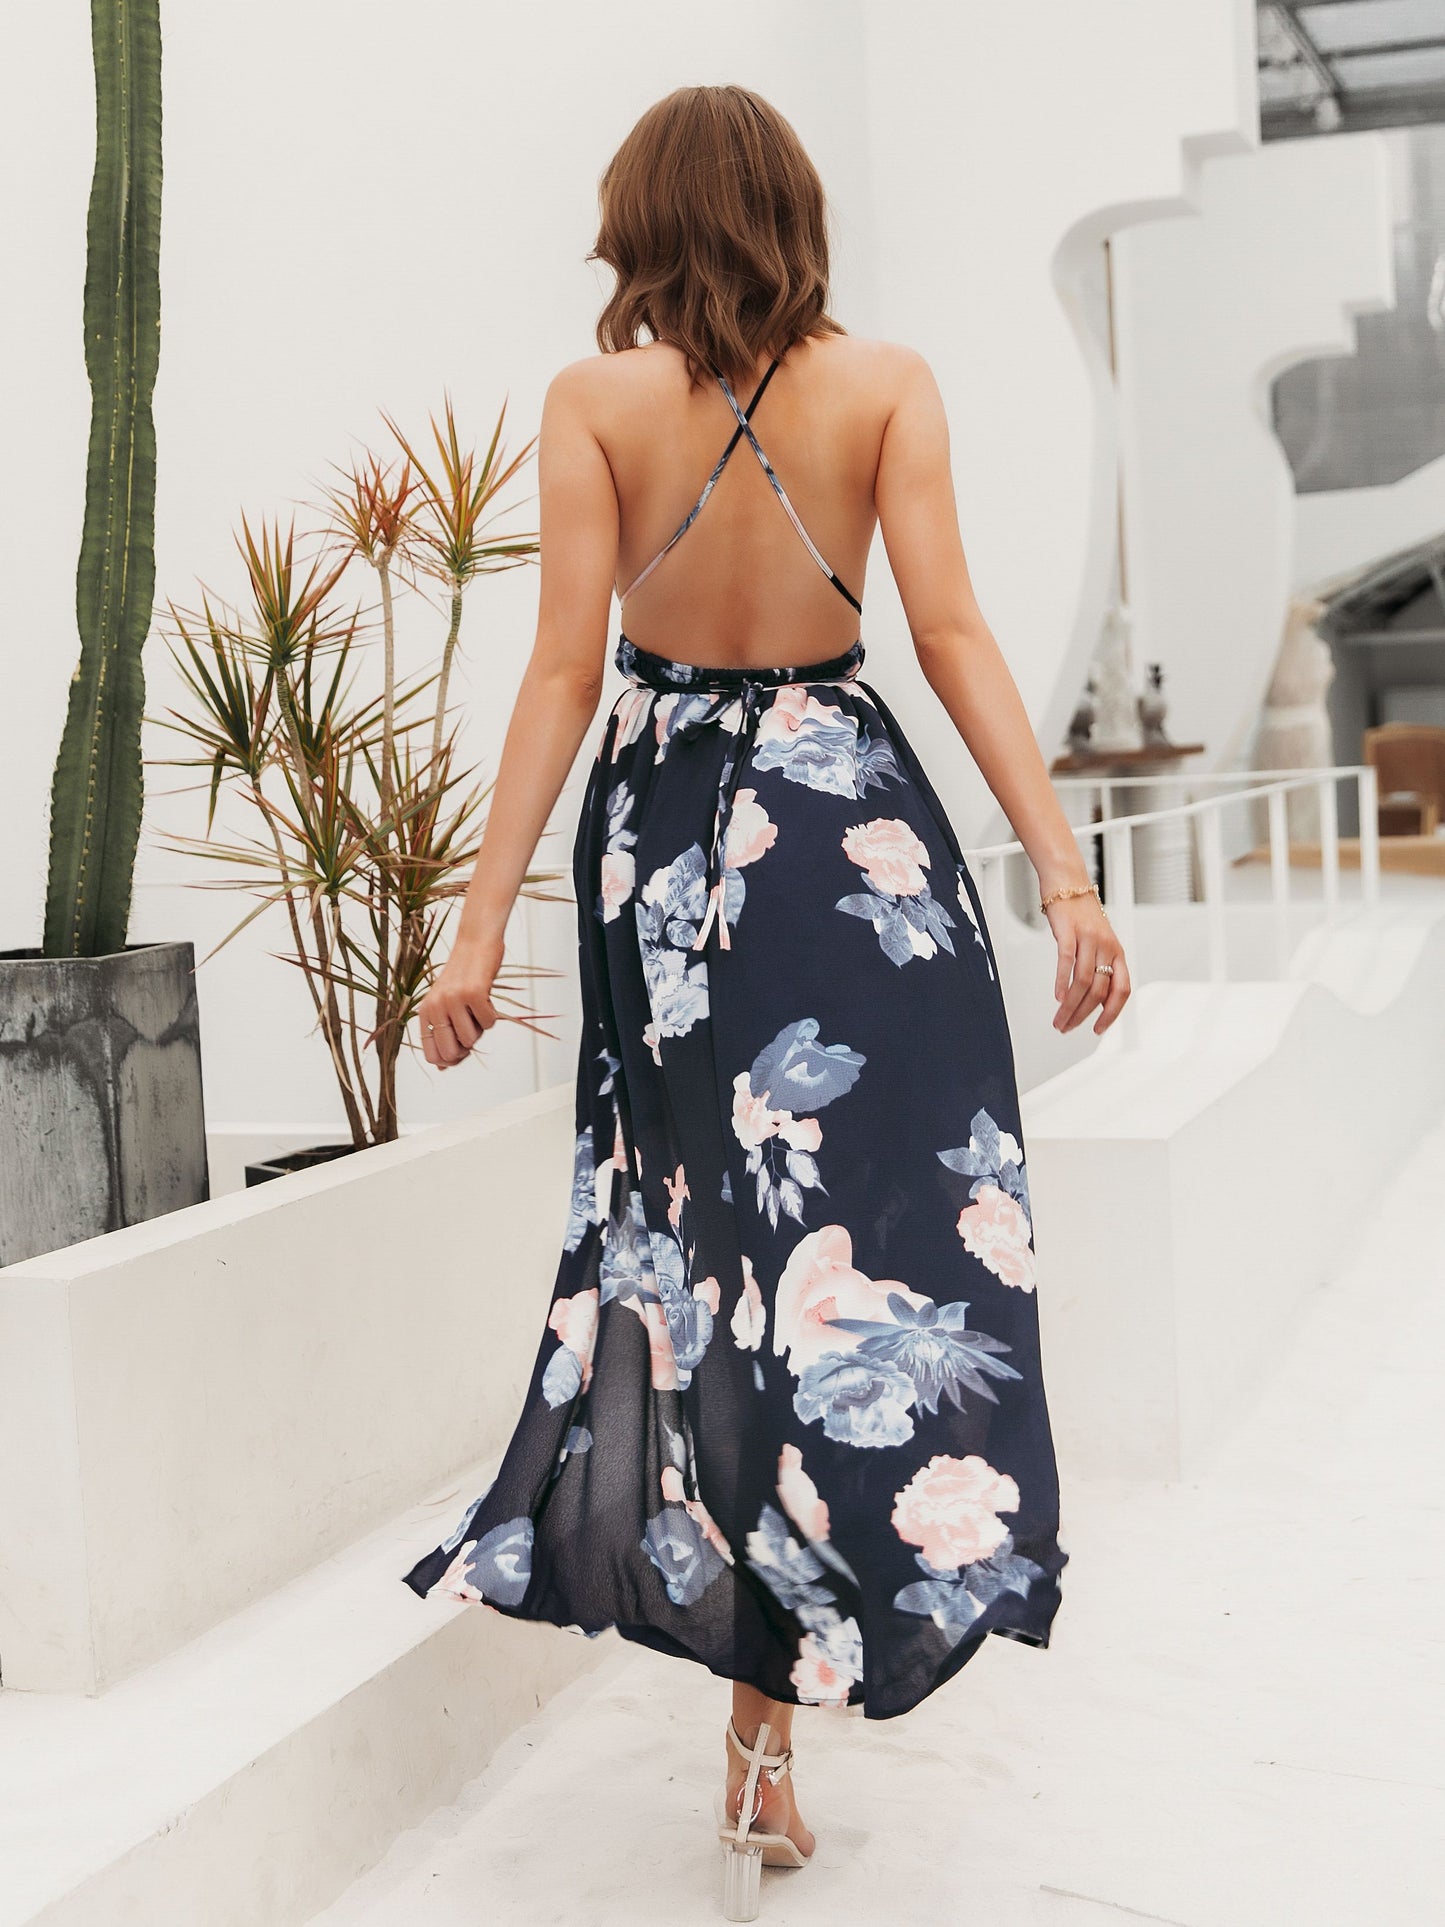 Holiday print straps backless summer party dress women High waist lace up split maxi dresses V-neck beach Dress The Clothing Company Sydney